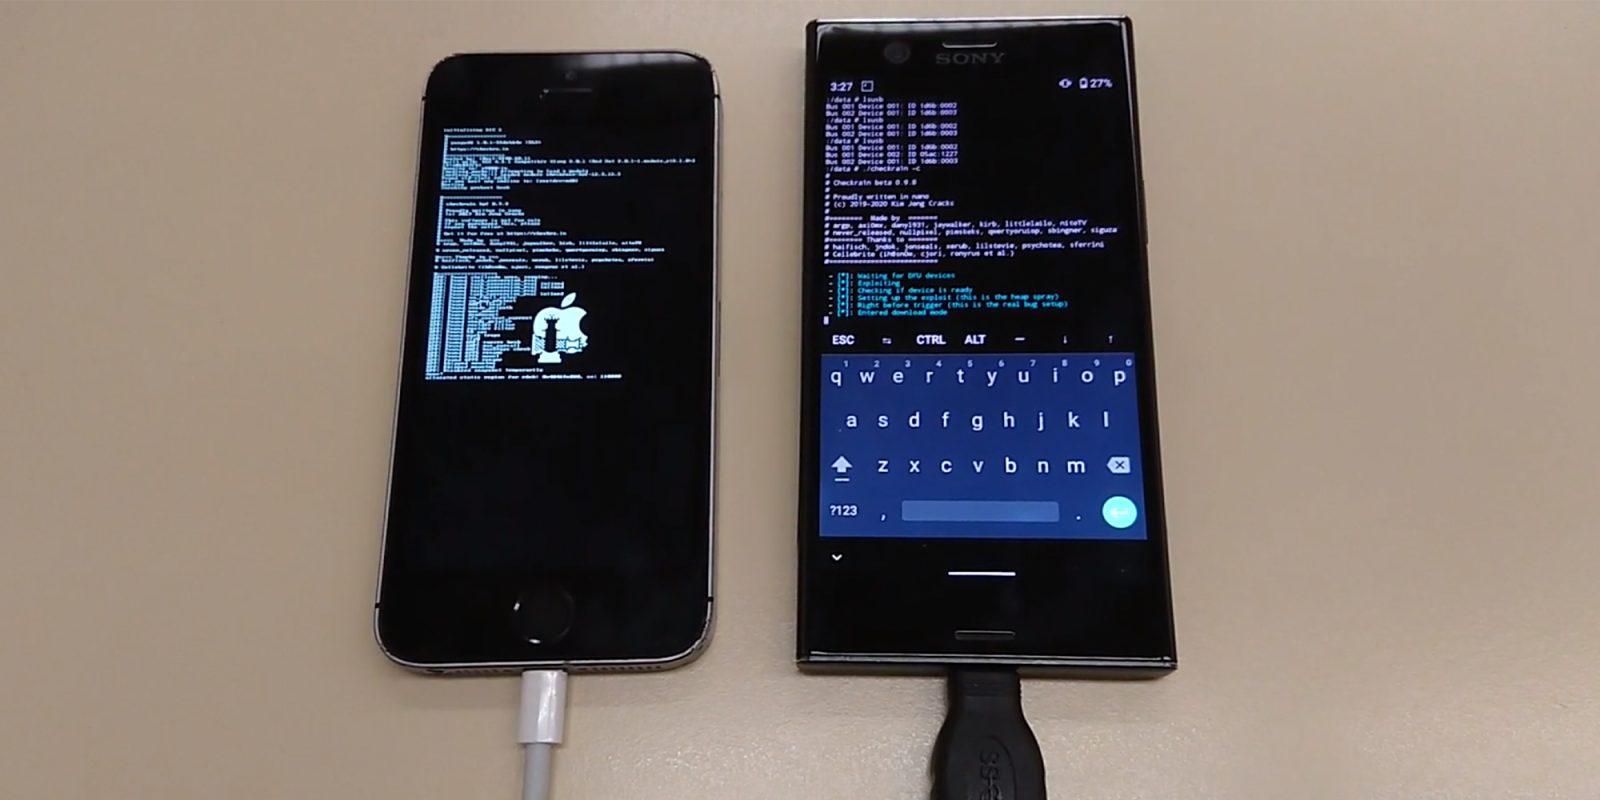 jailbreak iphone with rooted android checkra1n